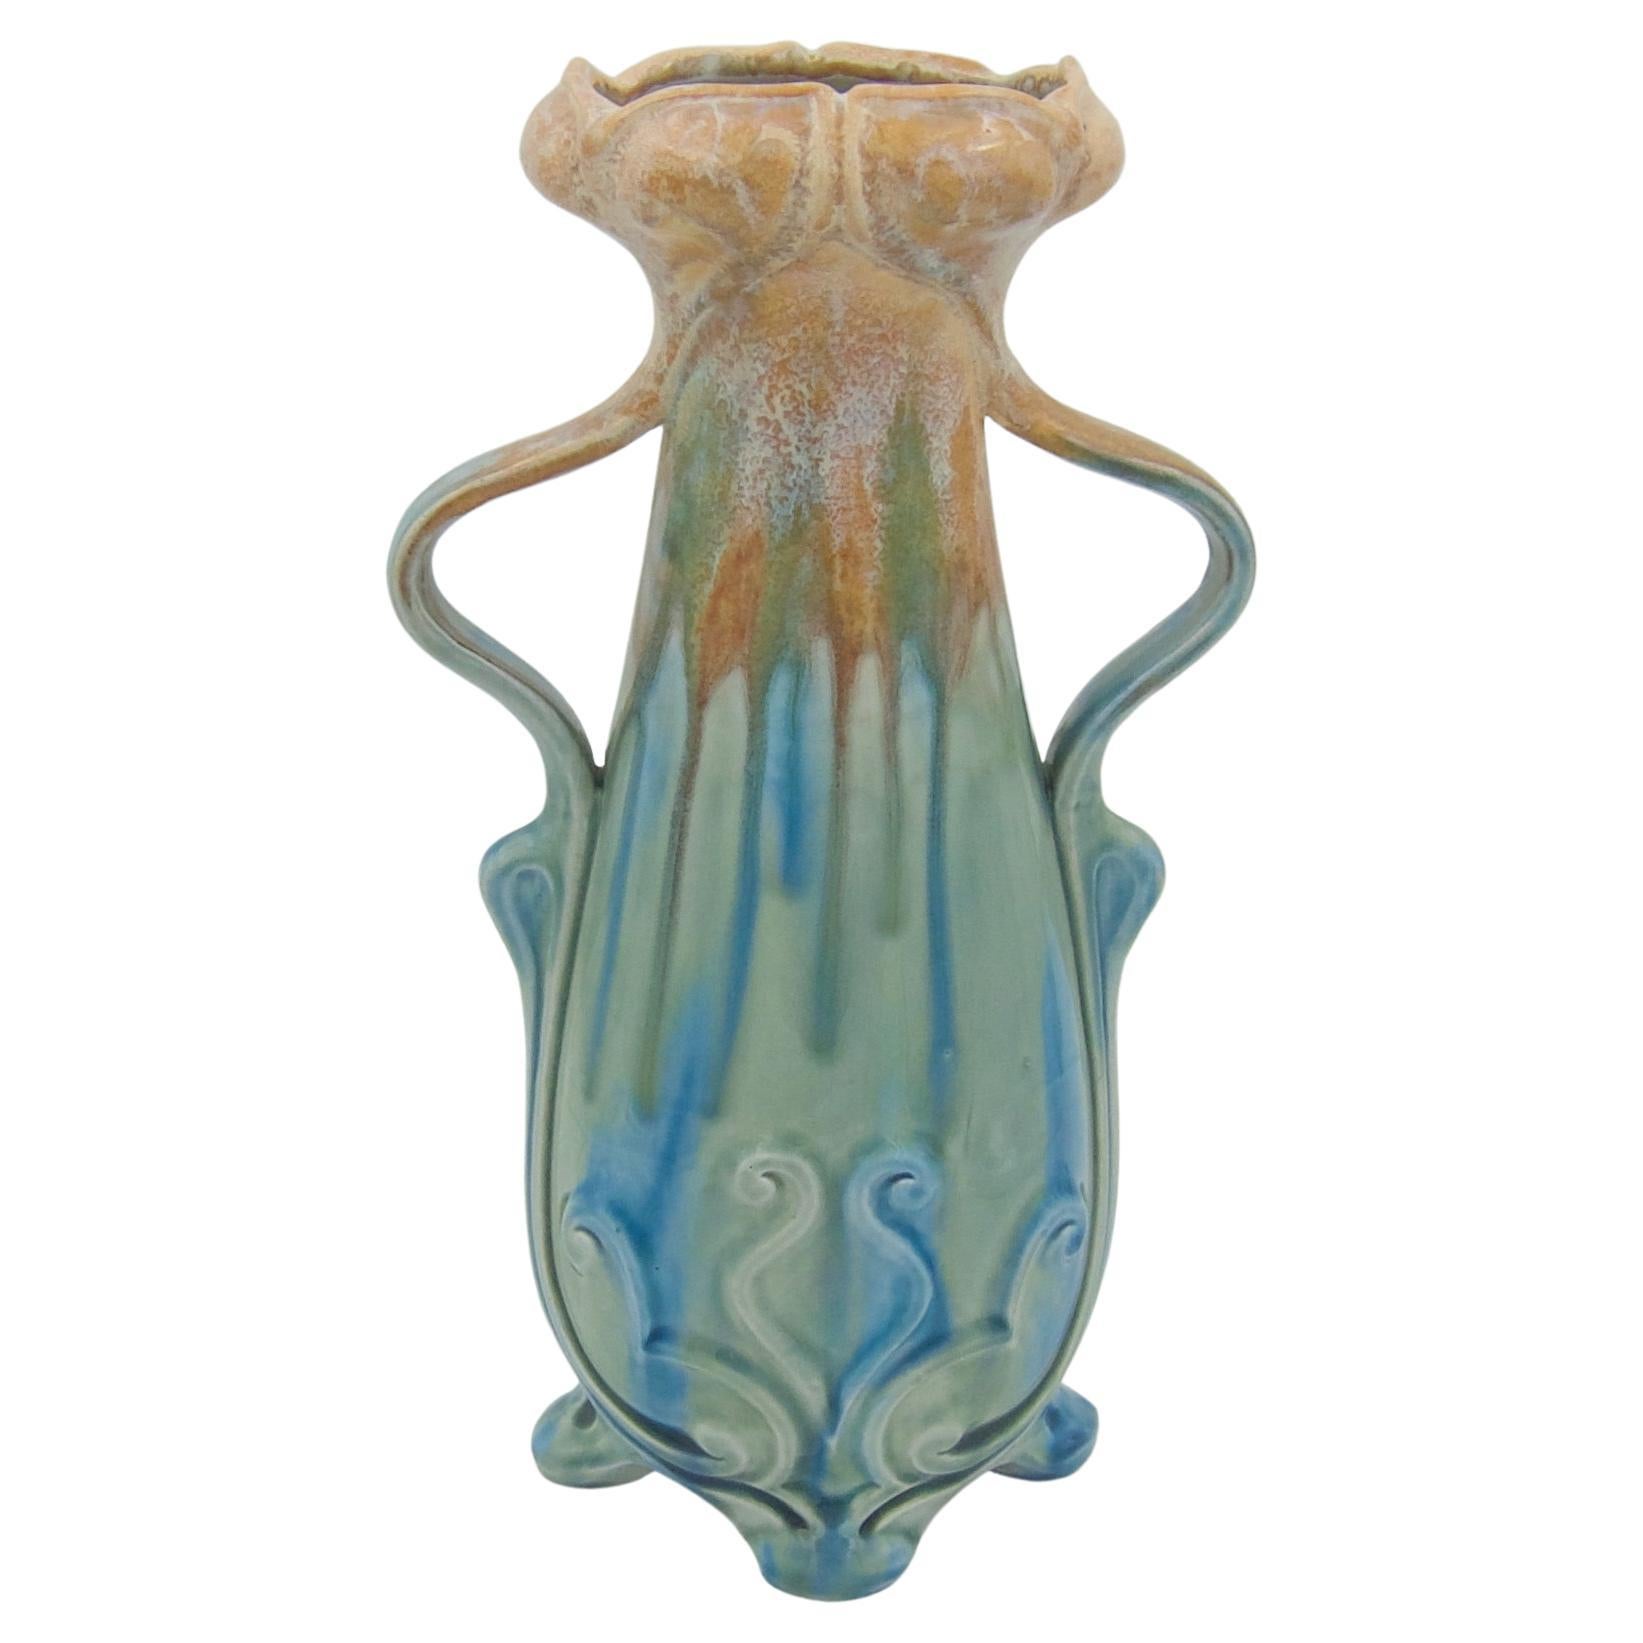 A tall art pottery vase by Wilhelm Schiller and Son (WS&S) of Bohemian, dating circa 1900.  The Art Nouveau vase rests on four splayed feet and is decorated with scroll motifs in relief and sinewy lines trailing up the sides of the body toward